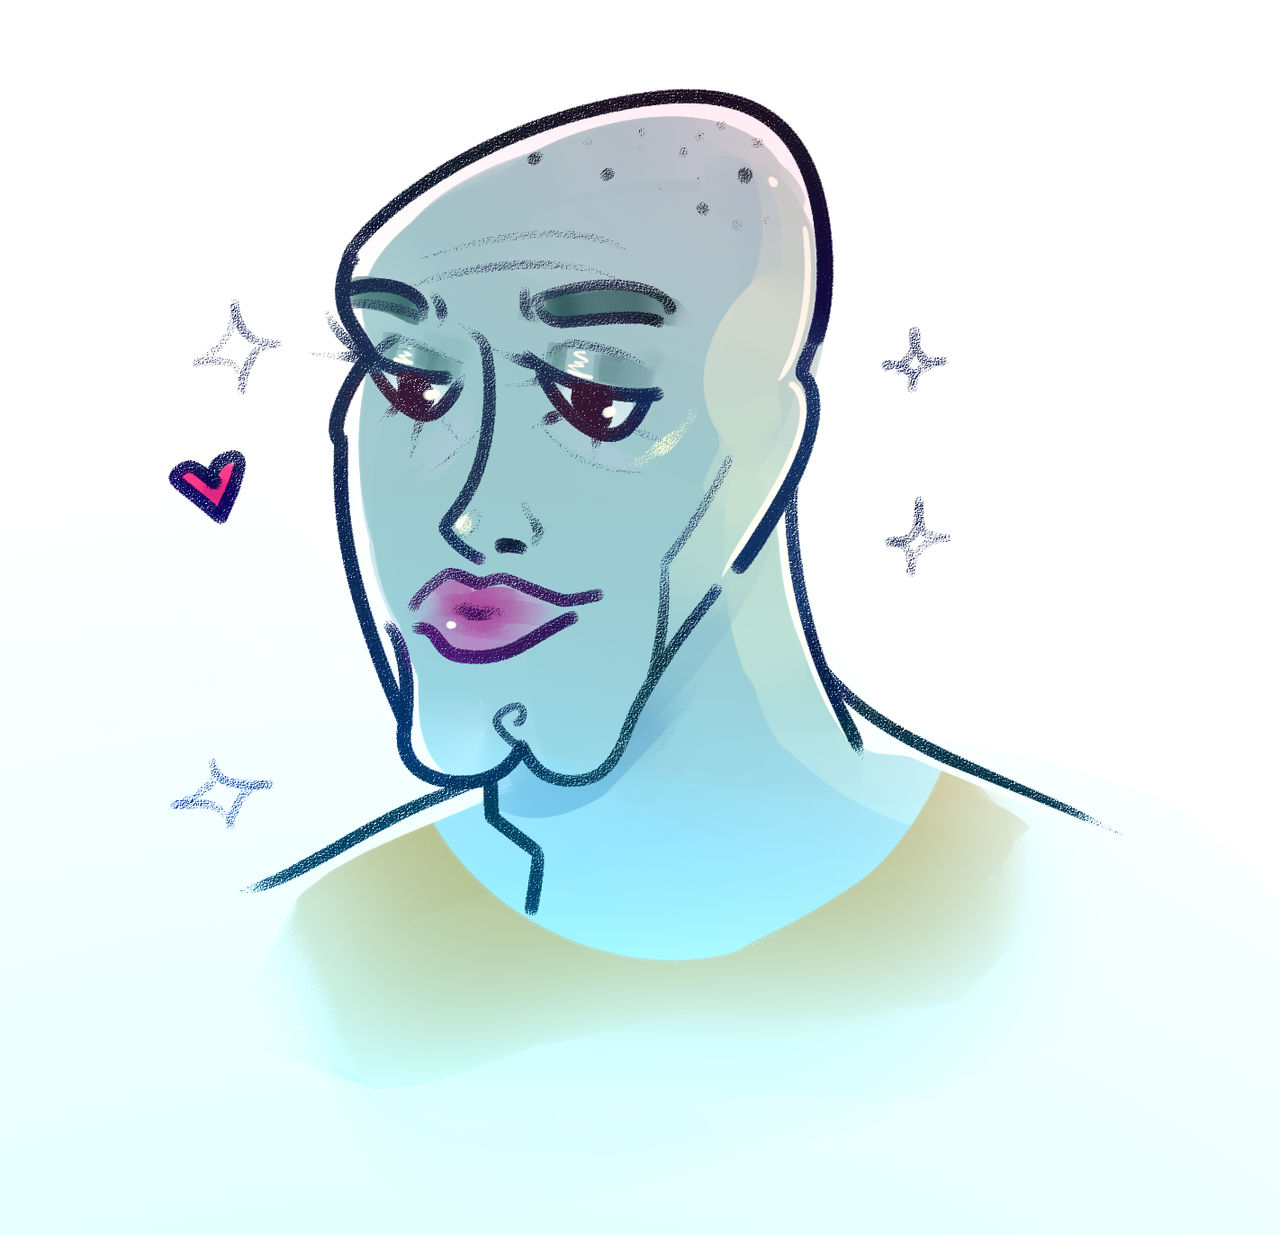 Handsome Squidward by perrezly on DeviantArt